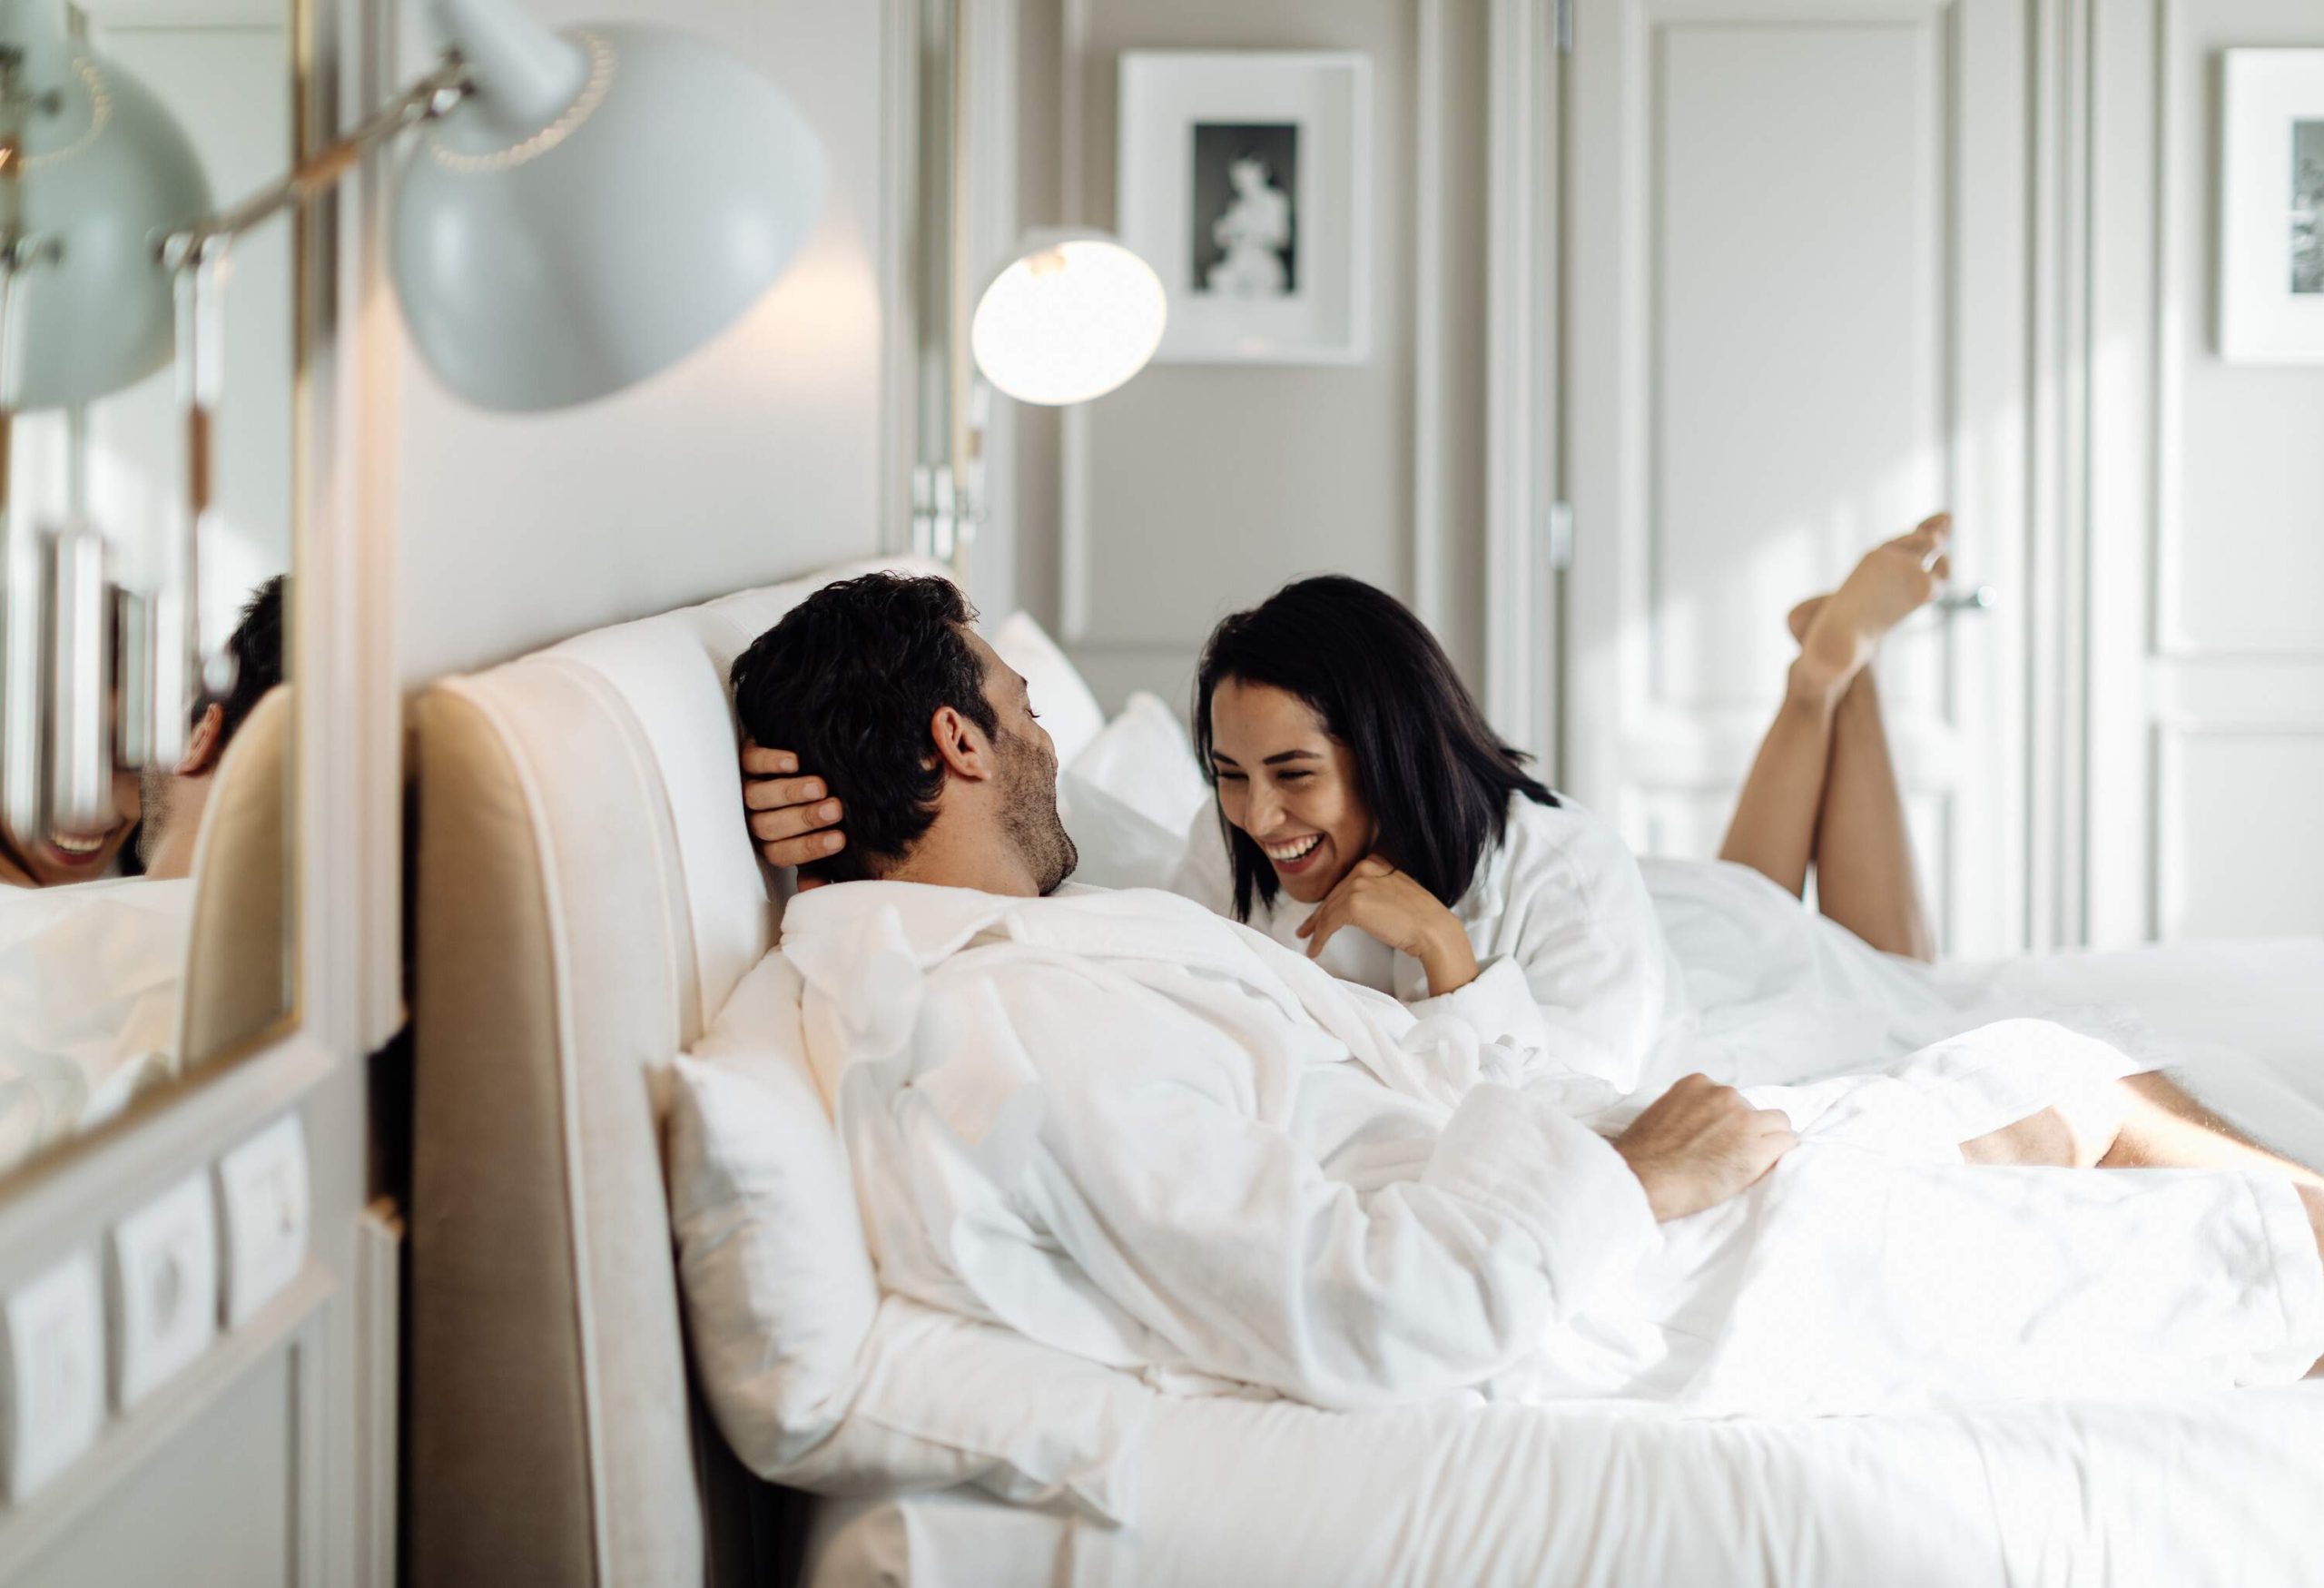 A couple laughing together in bed while wearing white plush robes.